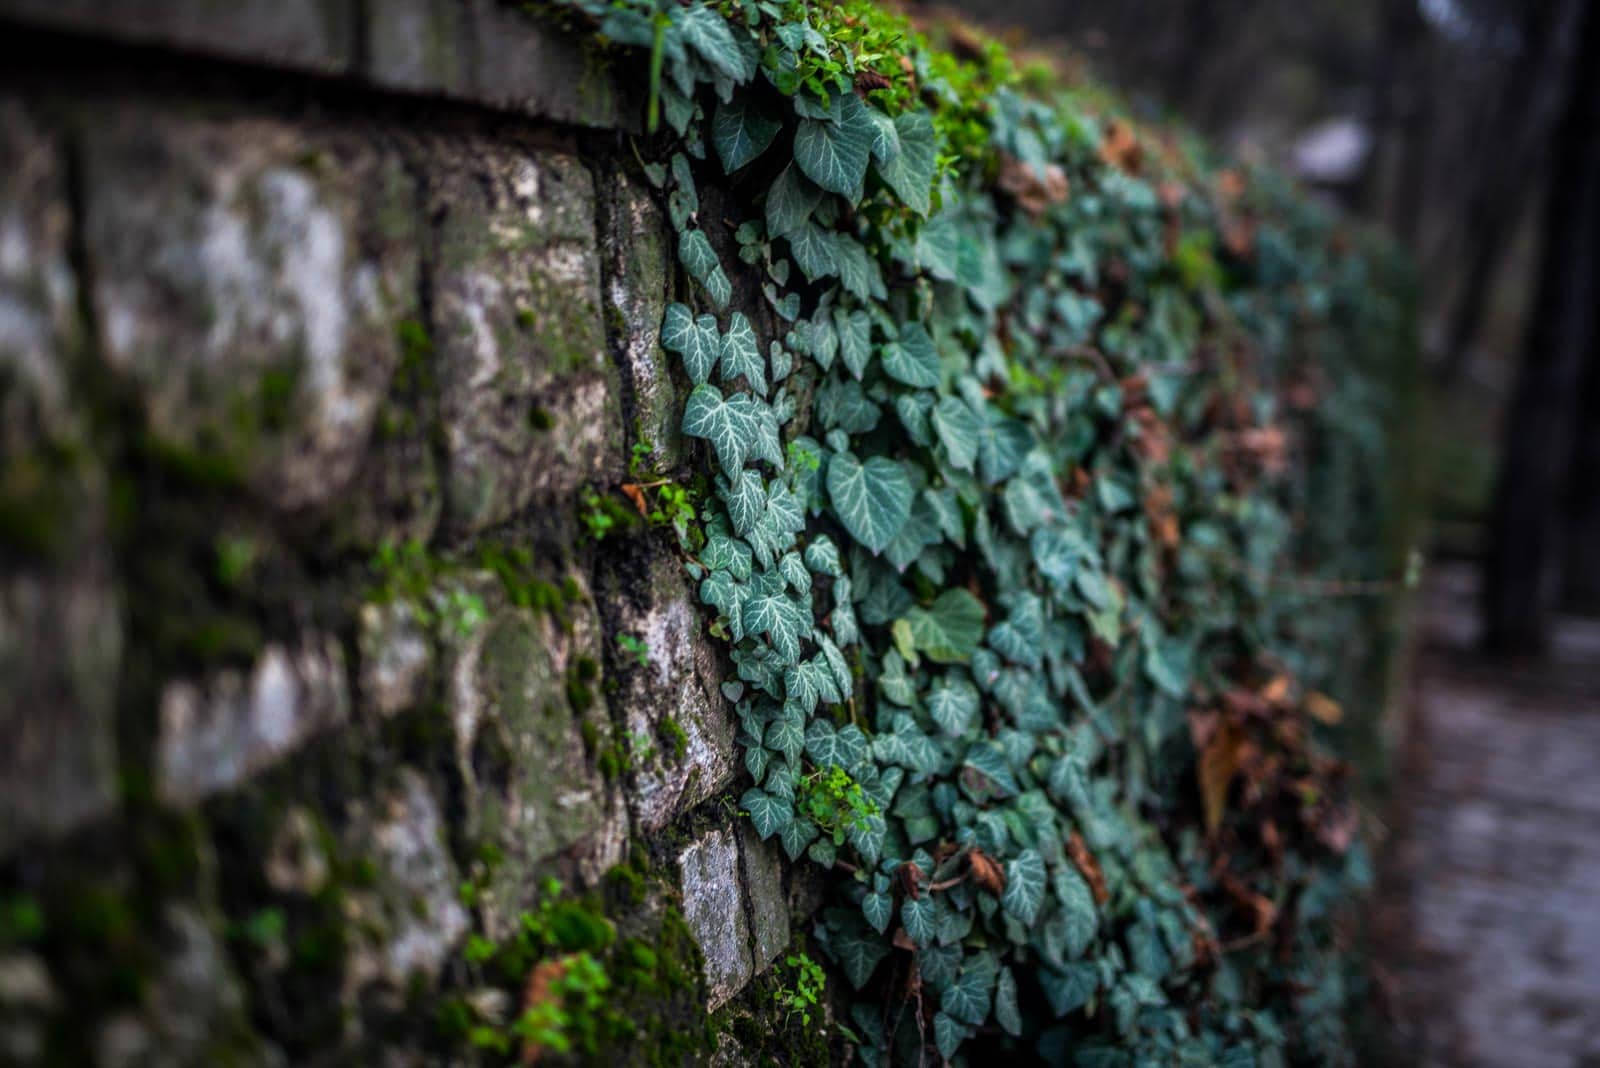 Ivy growing on a stone wall.